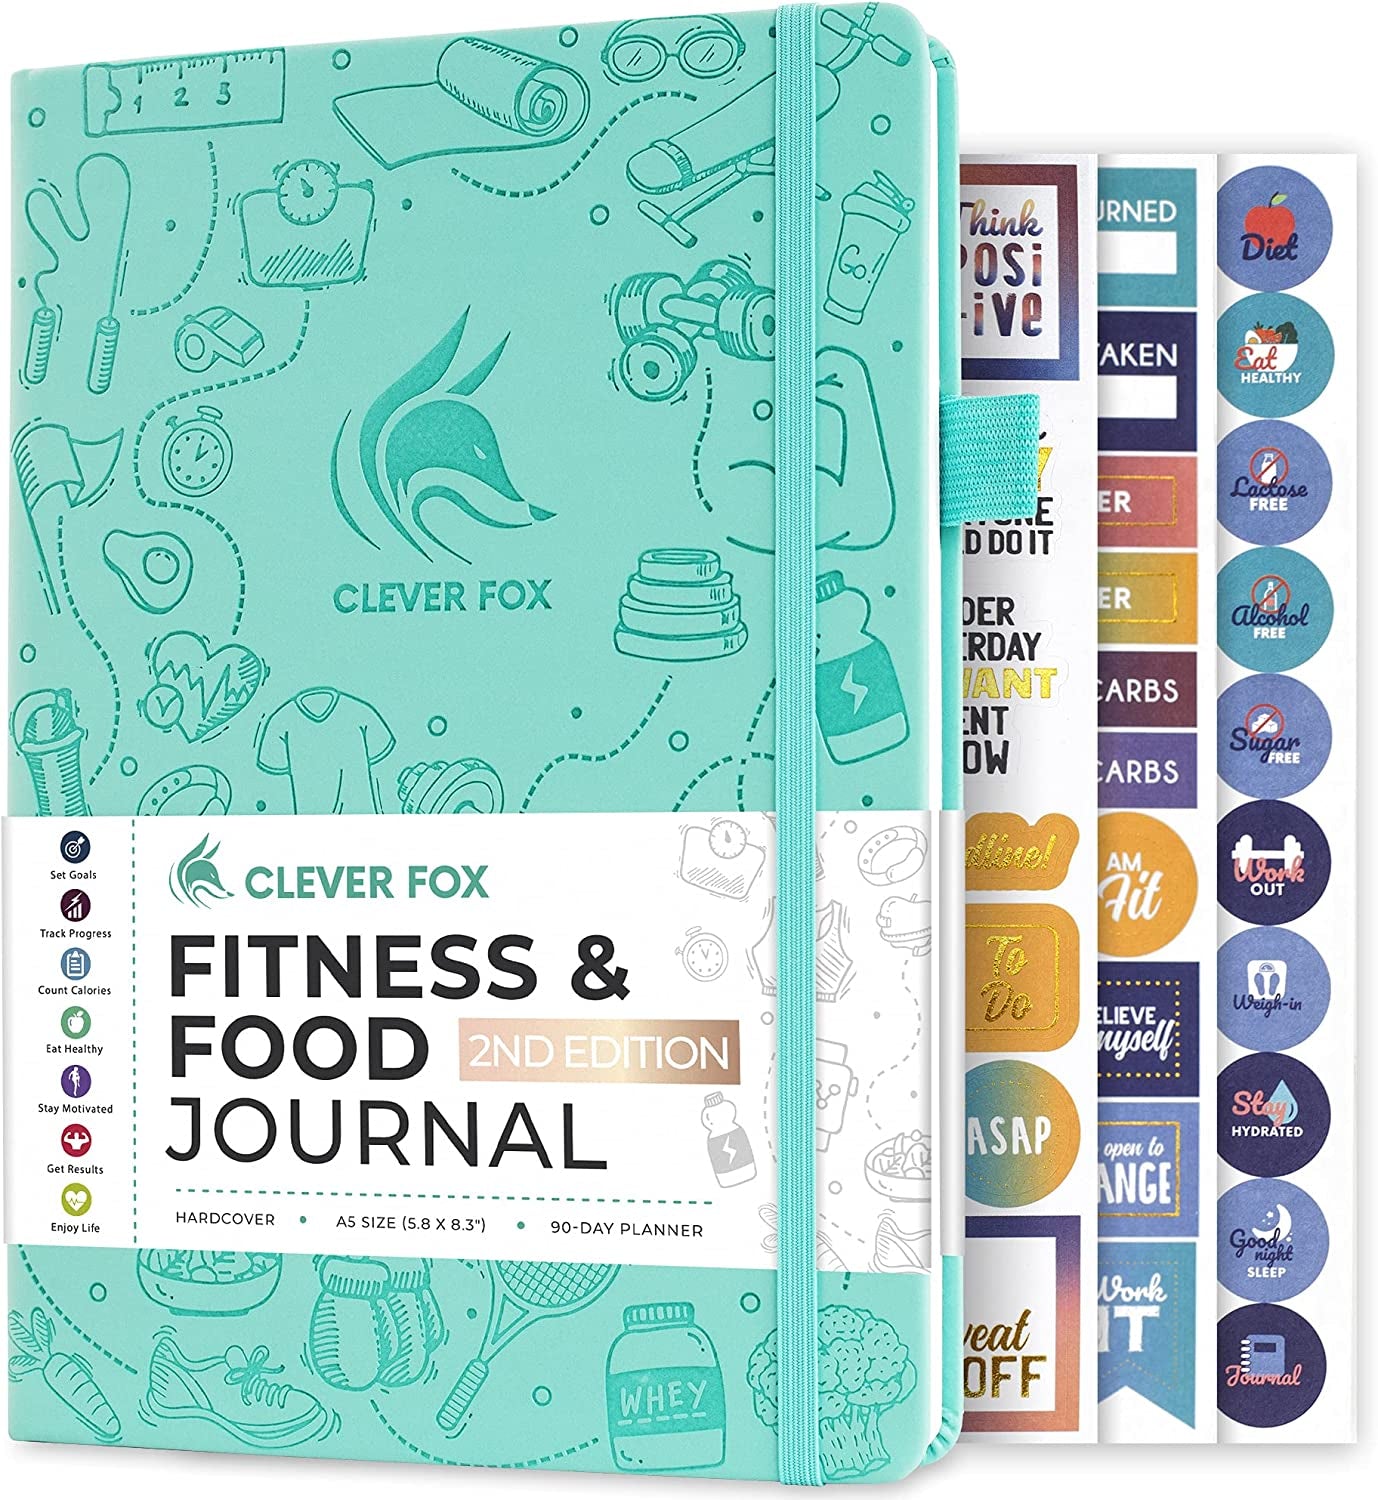 Clever Fox Fitness & Food Journal – Nutrition & Workout Planner for Women & Men – Diet & Gym Exercise Log Book with Calendars, Diet & Training Trackers - Undated, A5 Size, Hardcover (Turquoise)